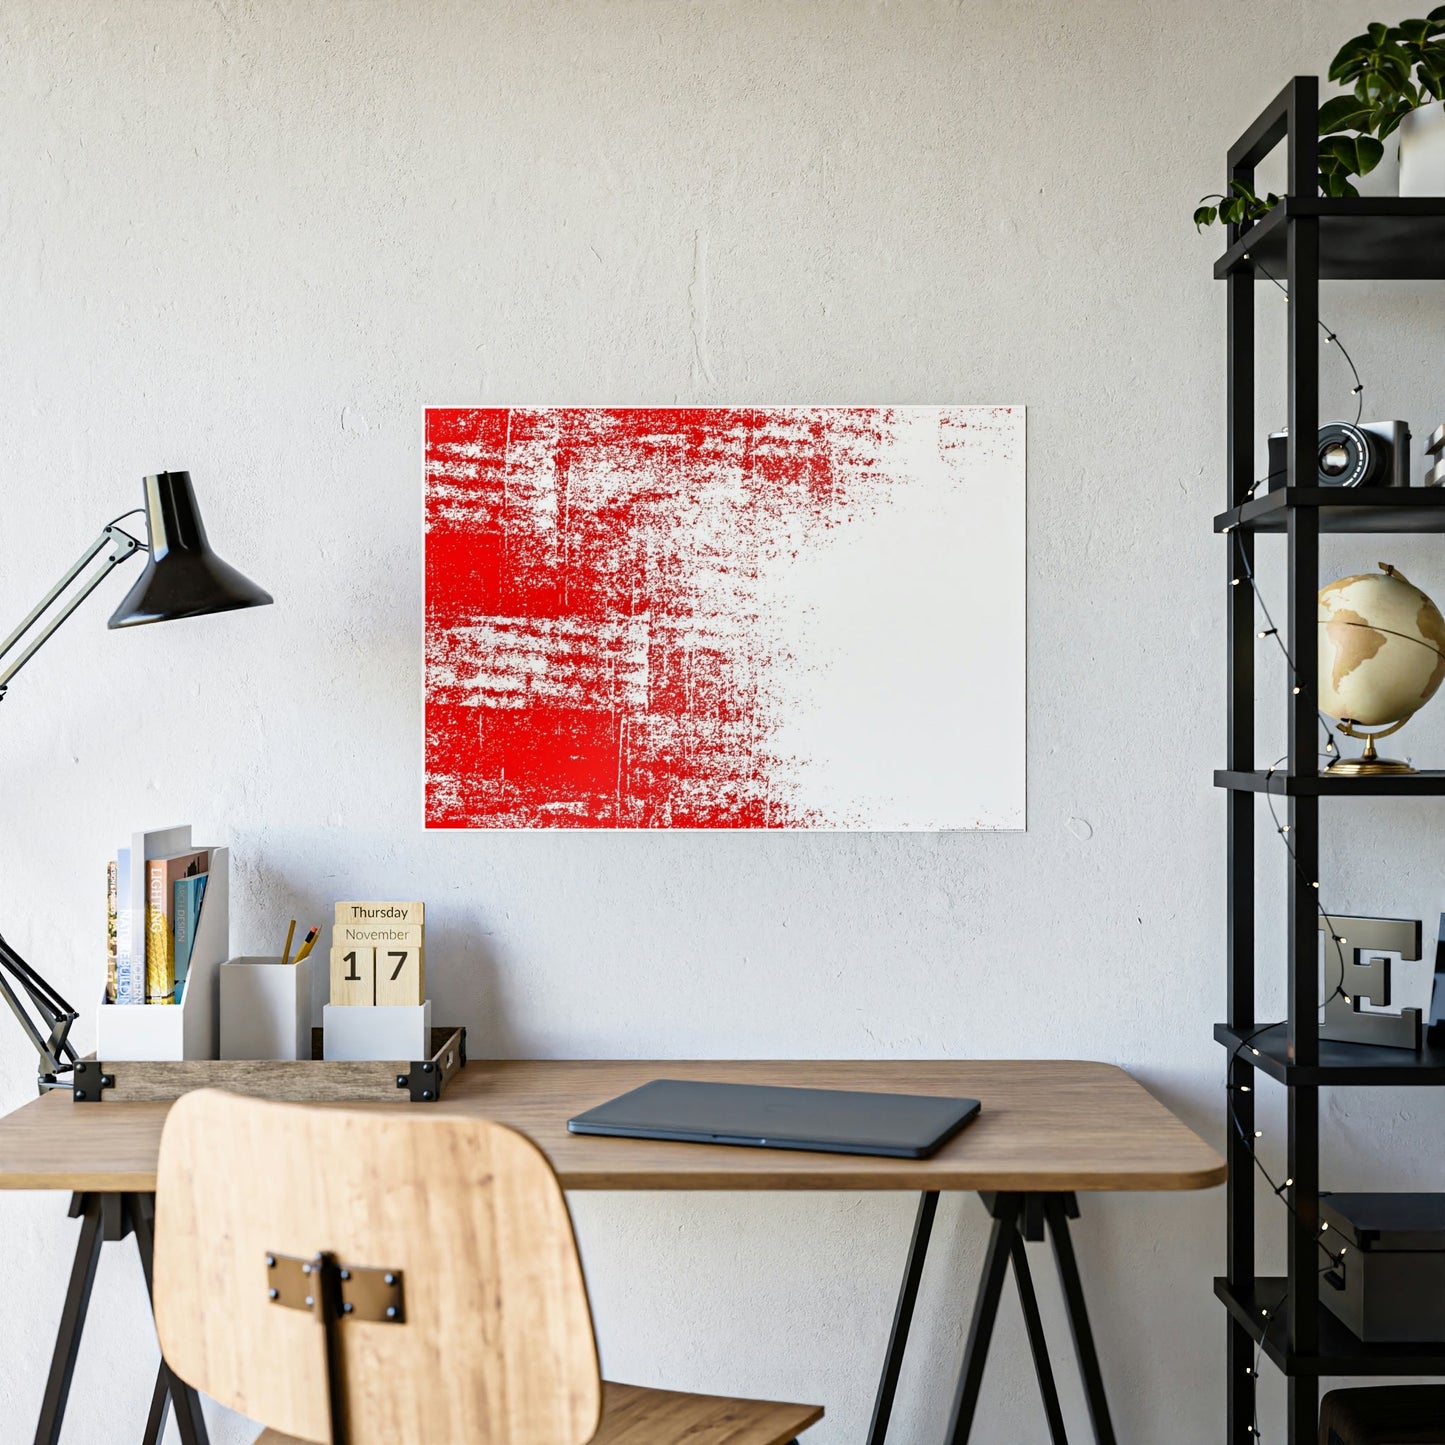 The Power of Red: Abstract Wall Art and Prints on Natural Canvas